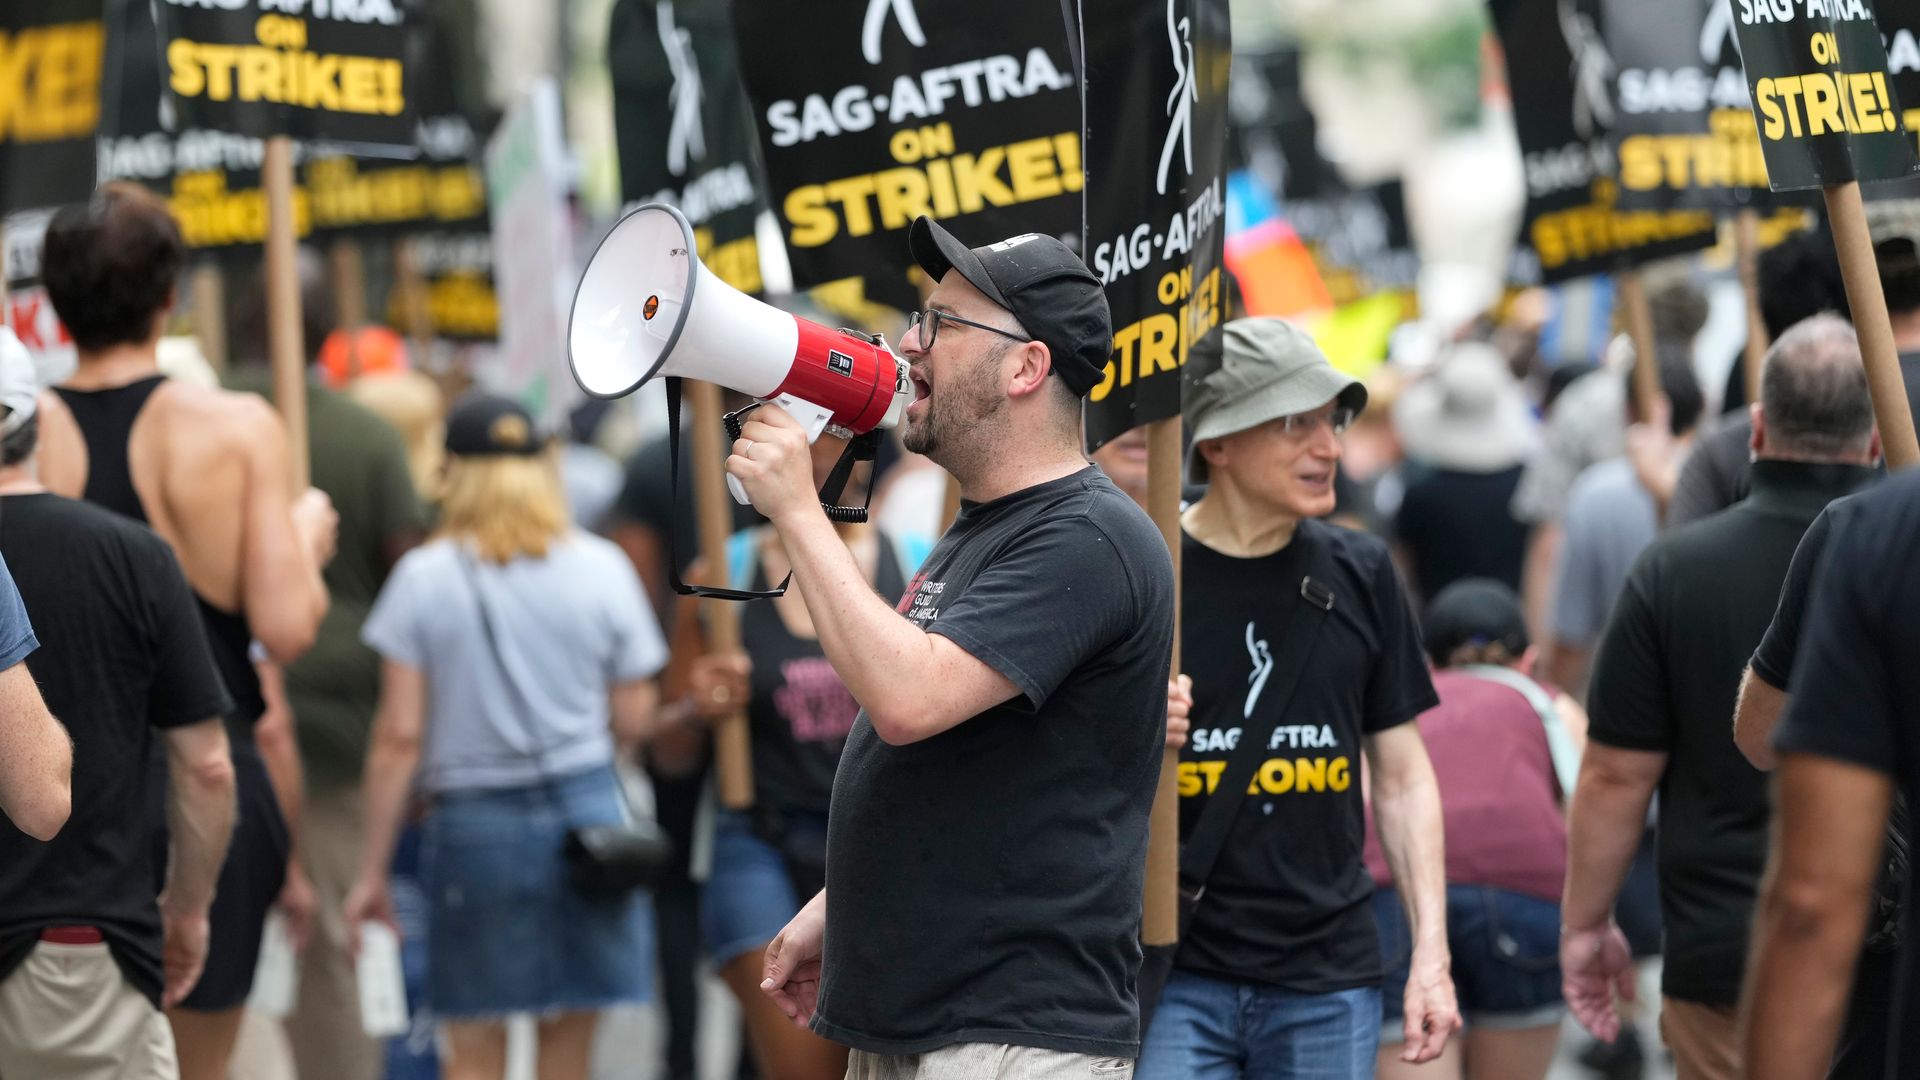 The SAG strike needs to fight to protect background workers or else multitudes of people will lose the support they need from work.